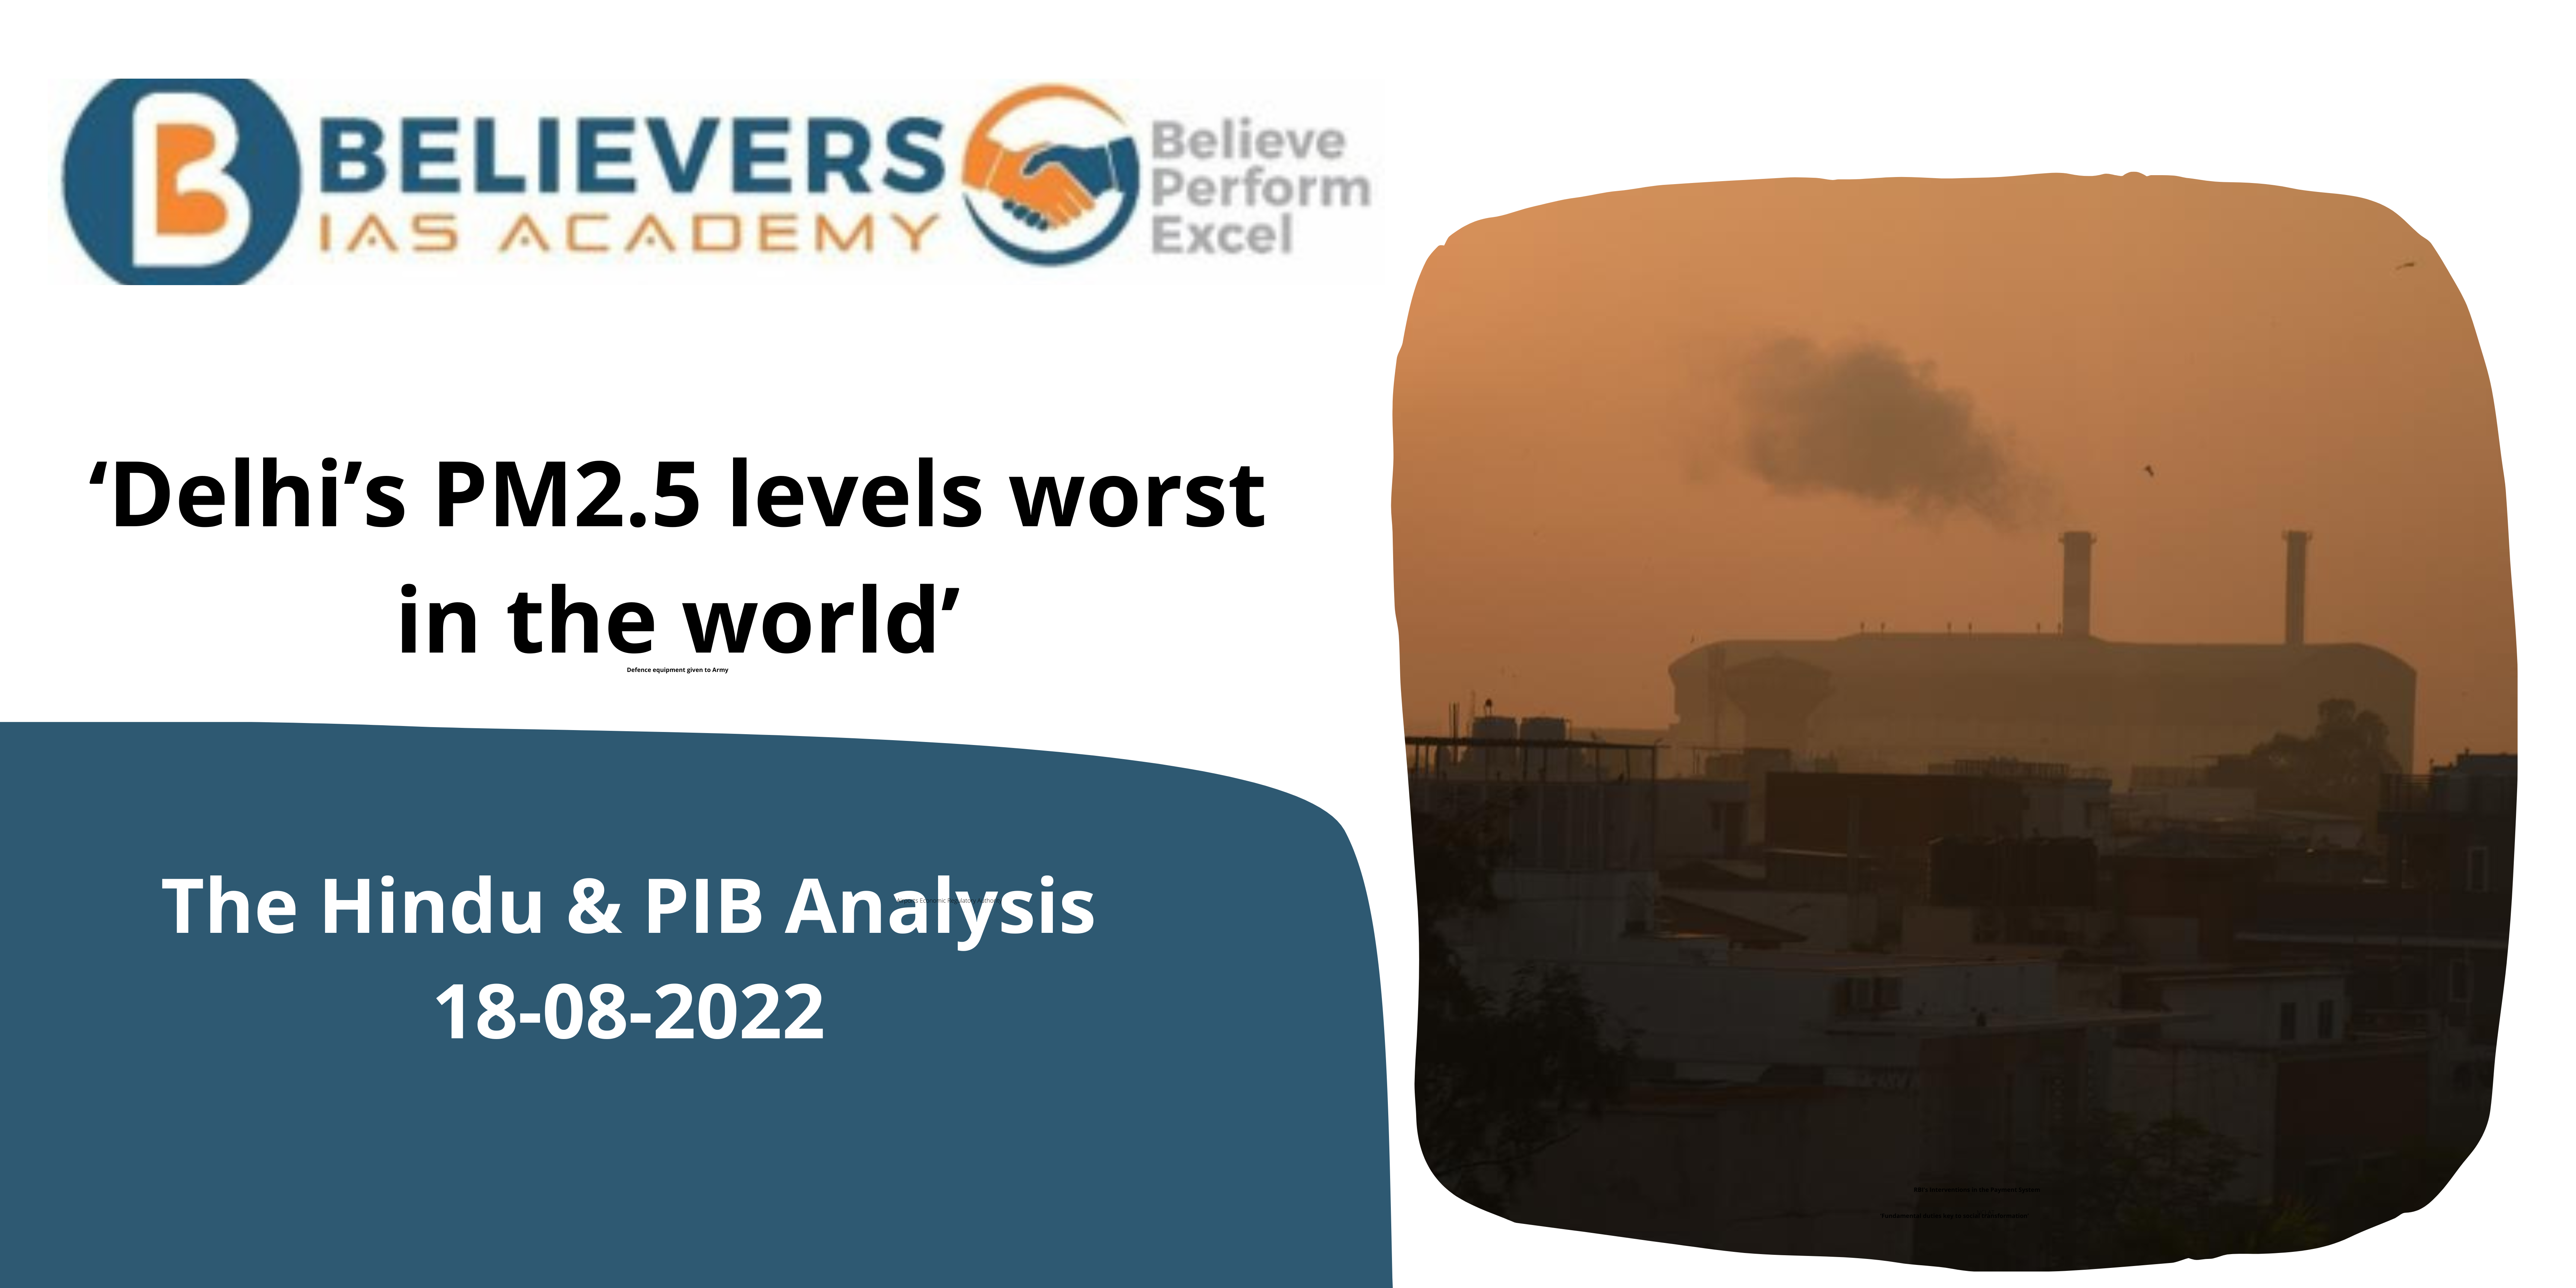 ‘Delhi’s PM2.5 levels worst in the world’